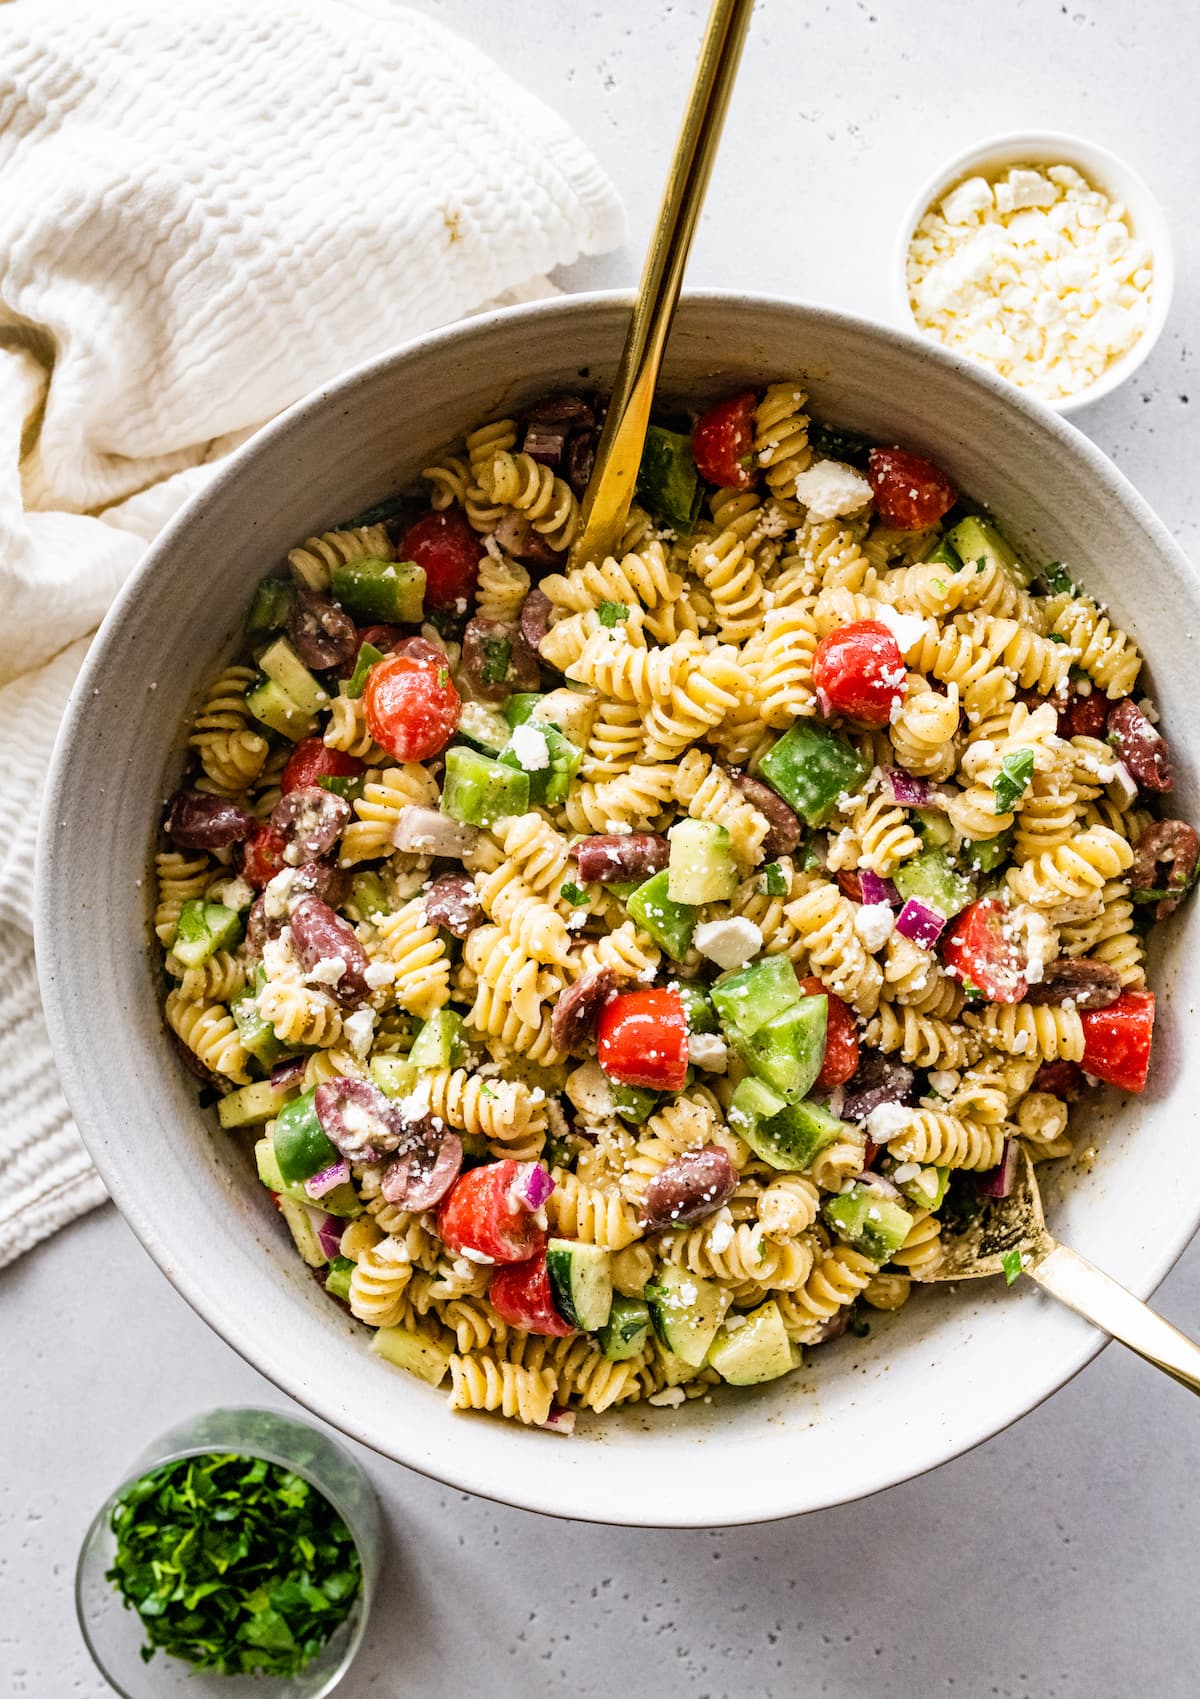 Greek pasta salad in a large white bowl with two metal serving spoons.